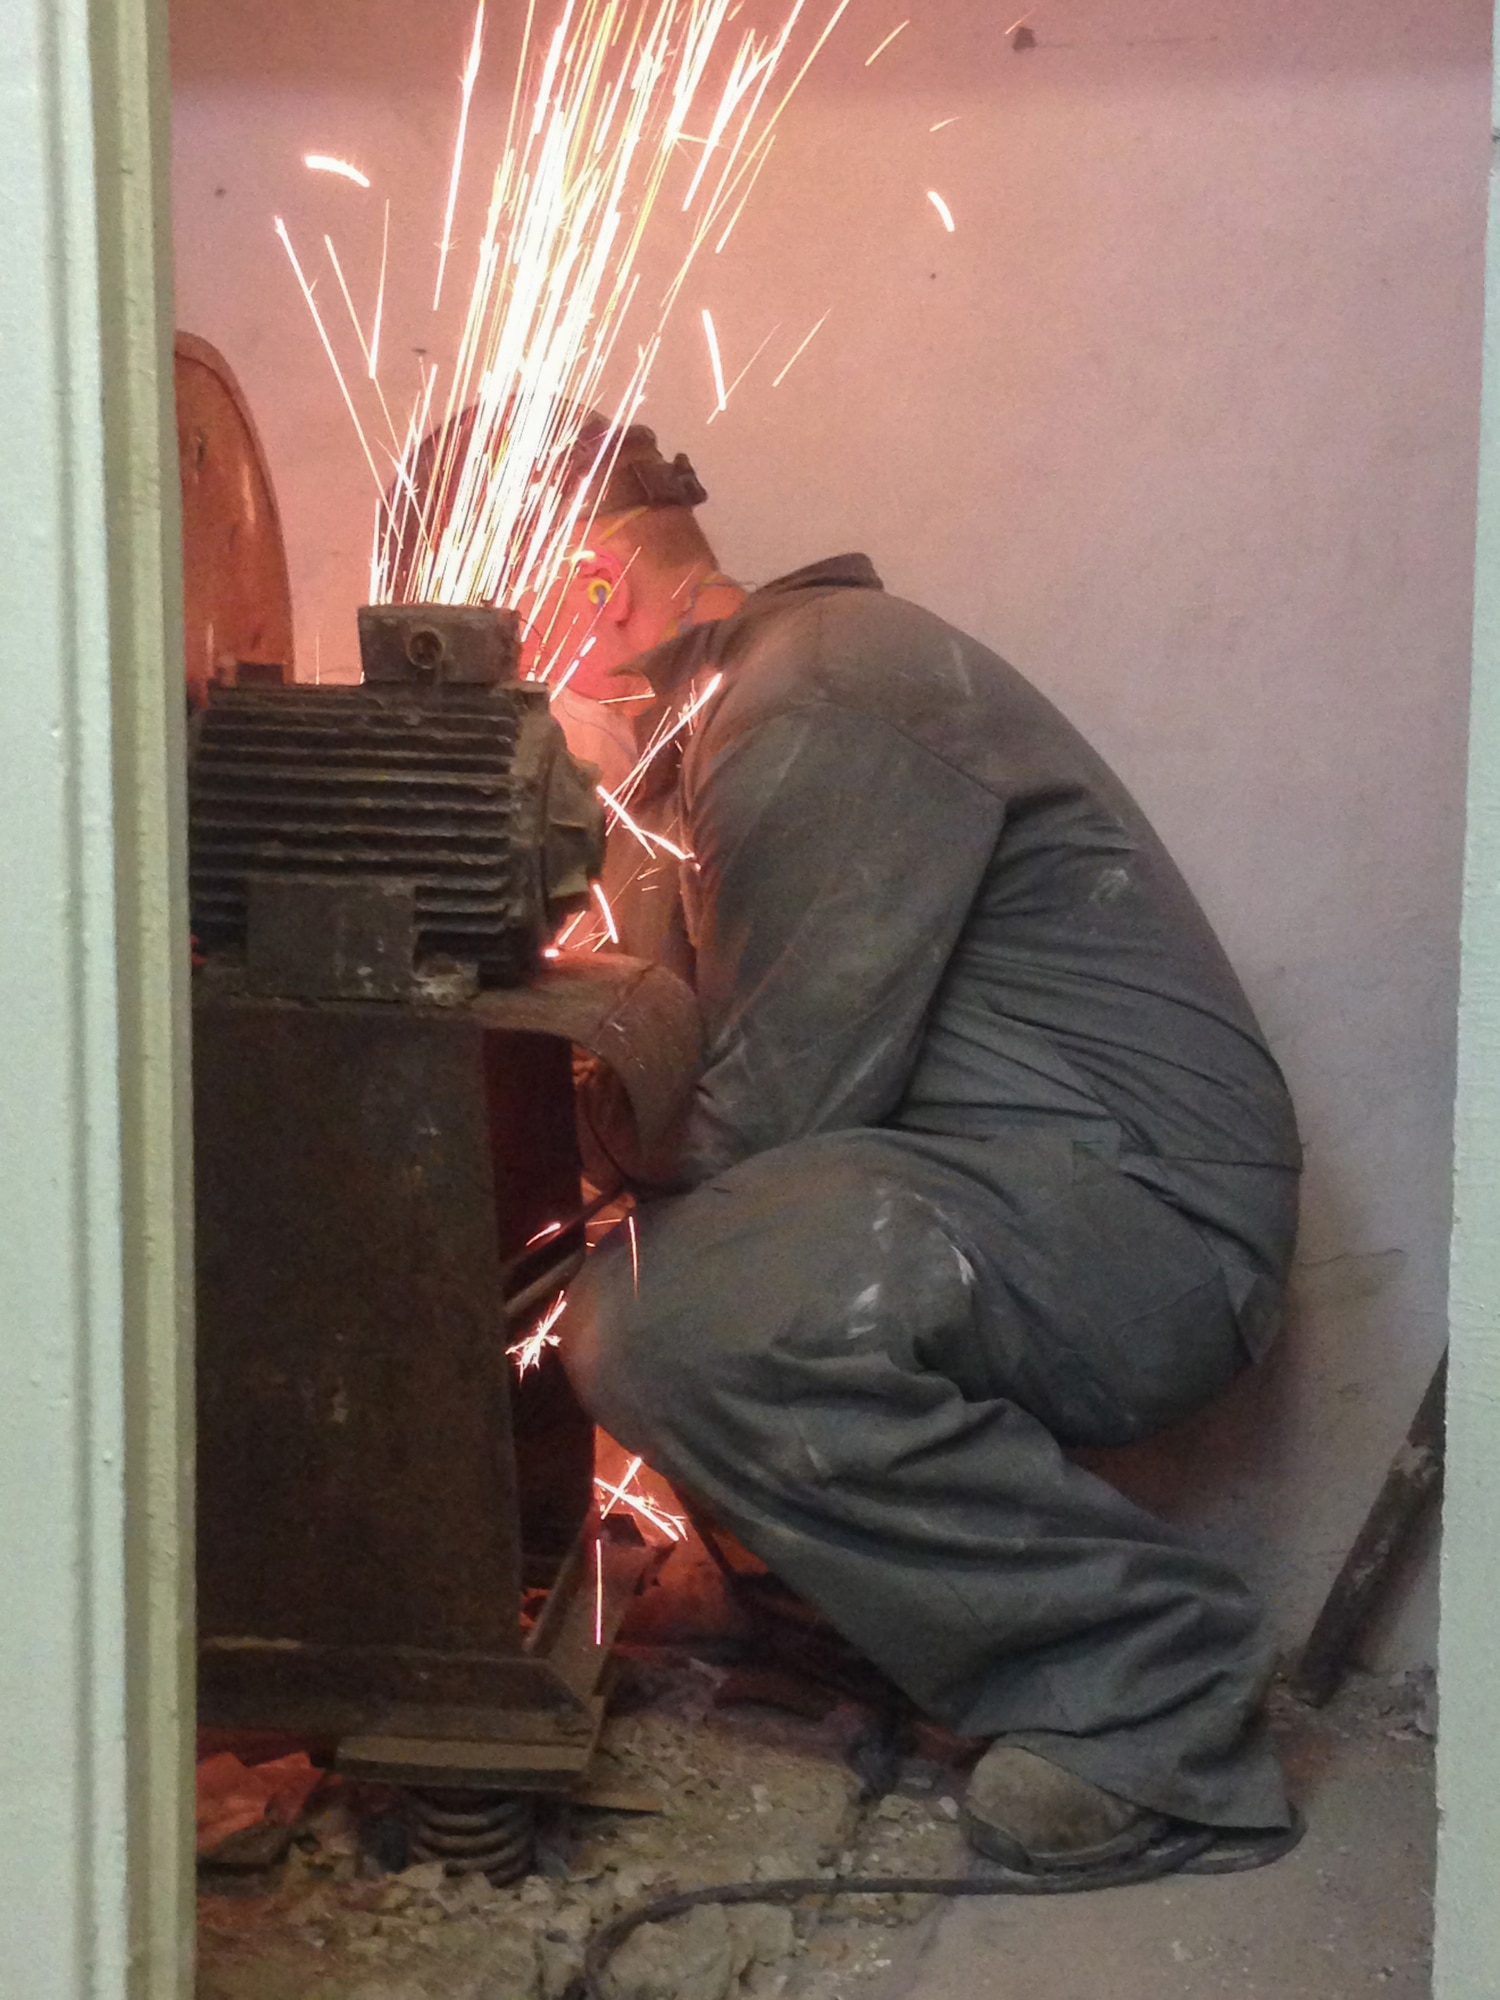 An Airman from Kentucky Air National Guard’s 123rd Civil Engineer Squadron in Louisville, Kentucky, cuts rusted metal from behind the kitchen wall of Special School #12 in Chisinau, Moldova, June 4, 2016. More than 35 Airmen from the unit are renovating the institution, which is the only school in Moldova specifically for deaf and special-needs students. The humanitarian project is a partnership with the Office of Defense Cooperation and U.S. European Command, with funds being provided by the National Guard Bureau. (U.S. Air National Guard photo by Tech. Sgt. Vicky Spesard)